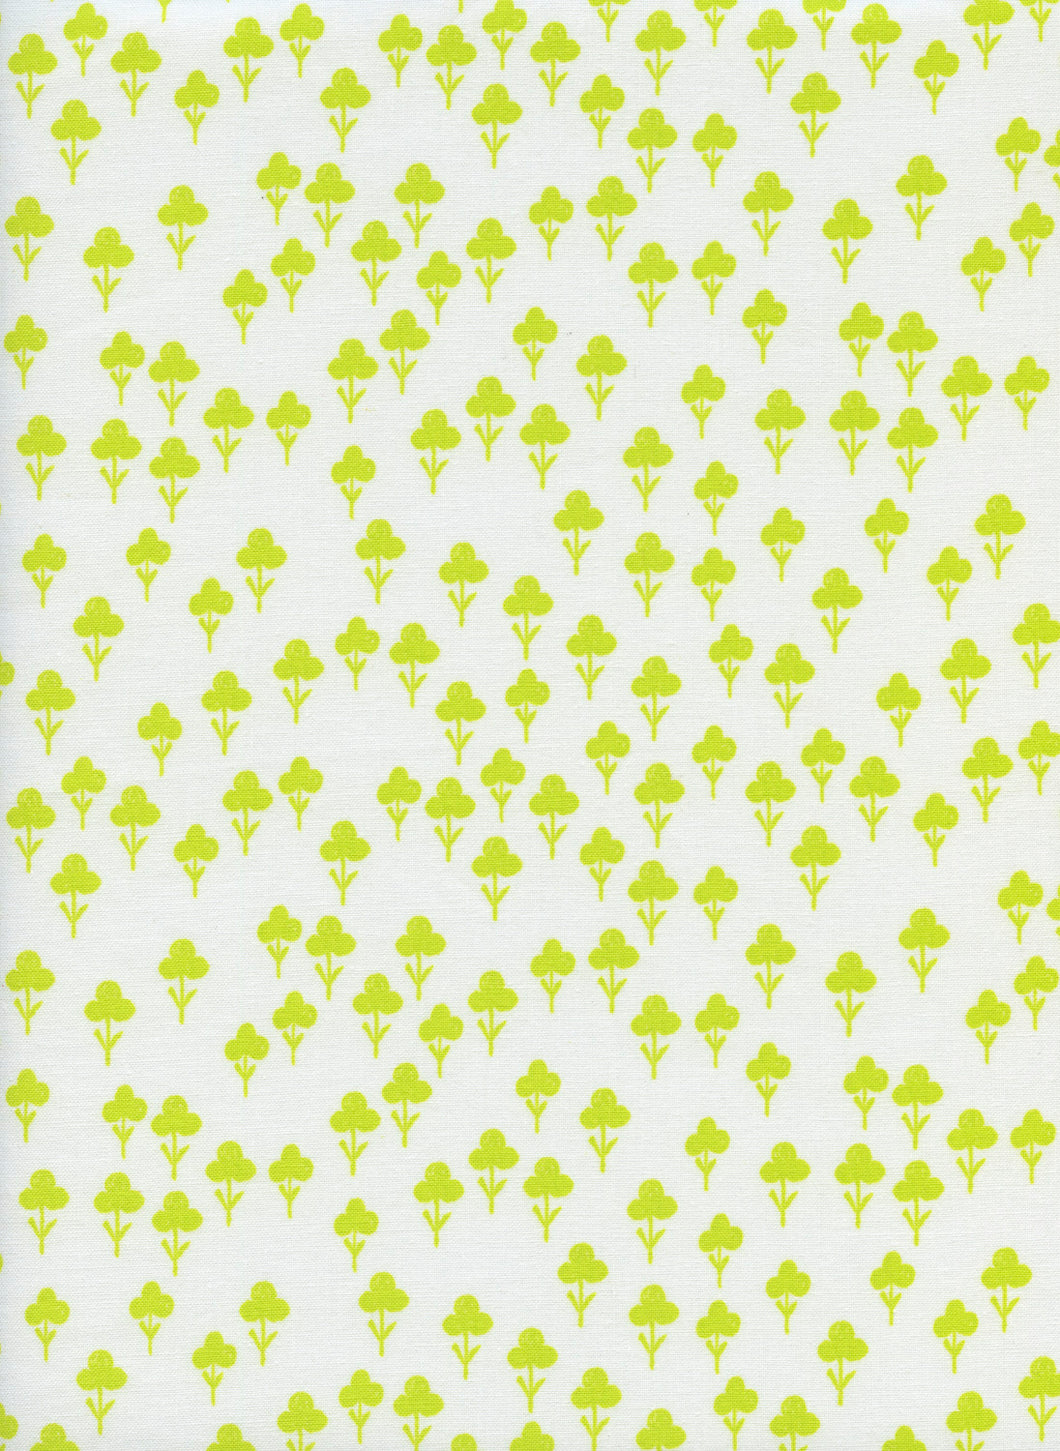 Image of Clovers in Yellow - Cotton and Steel - Sarah Watts - Front Yard